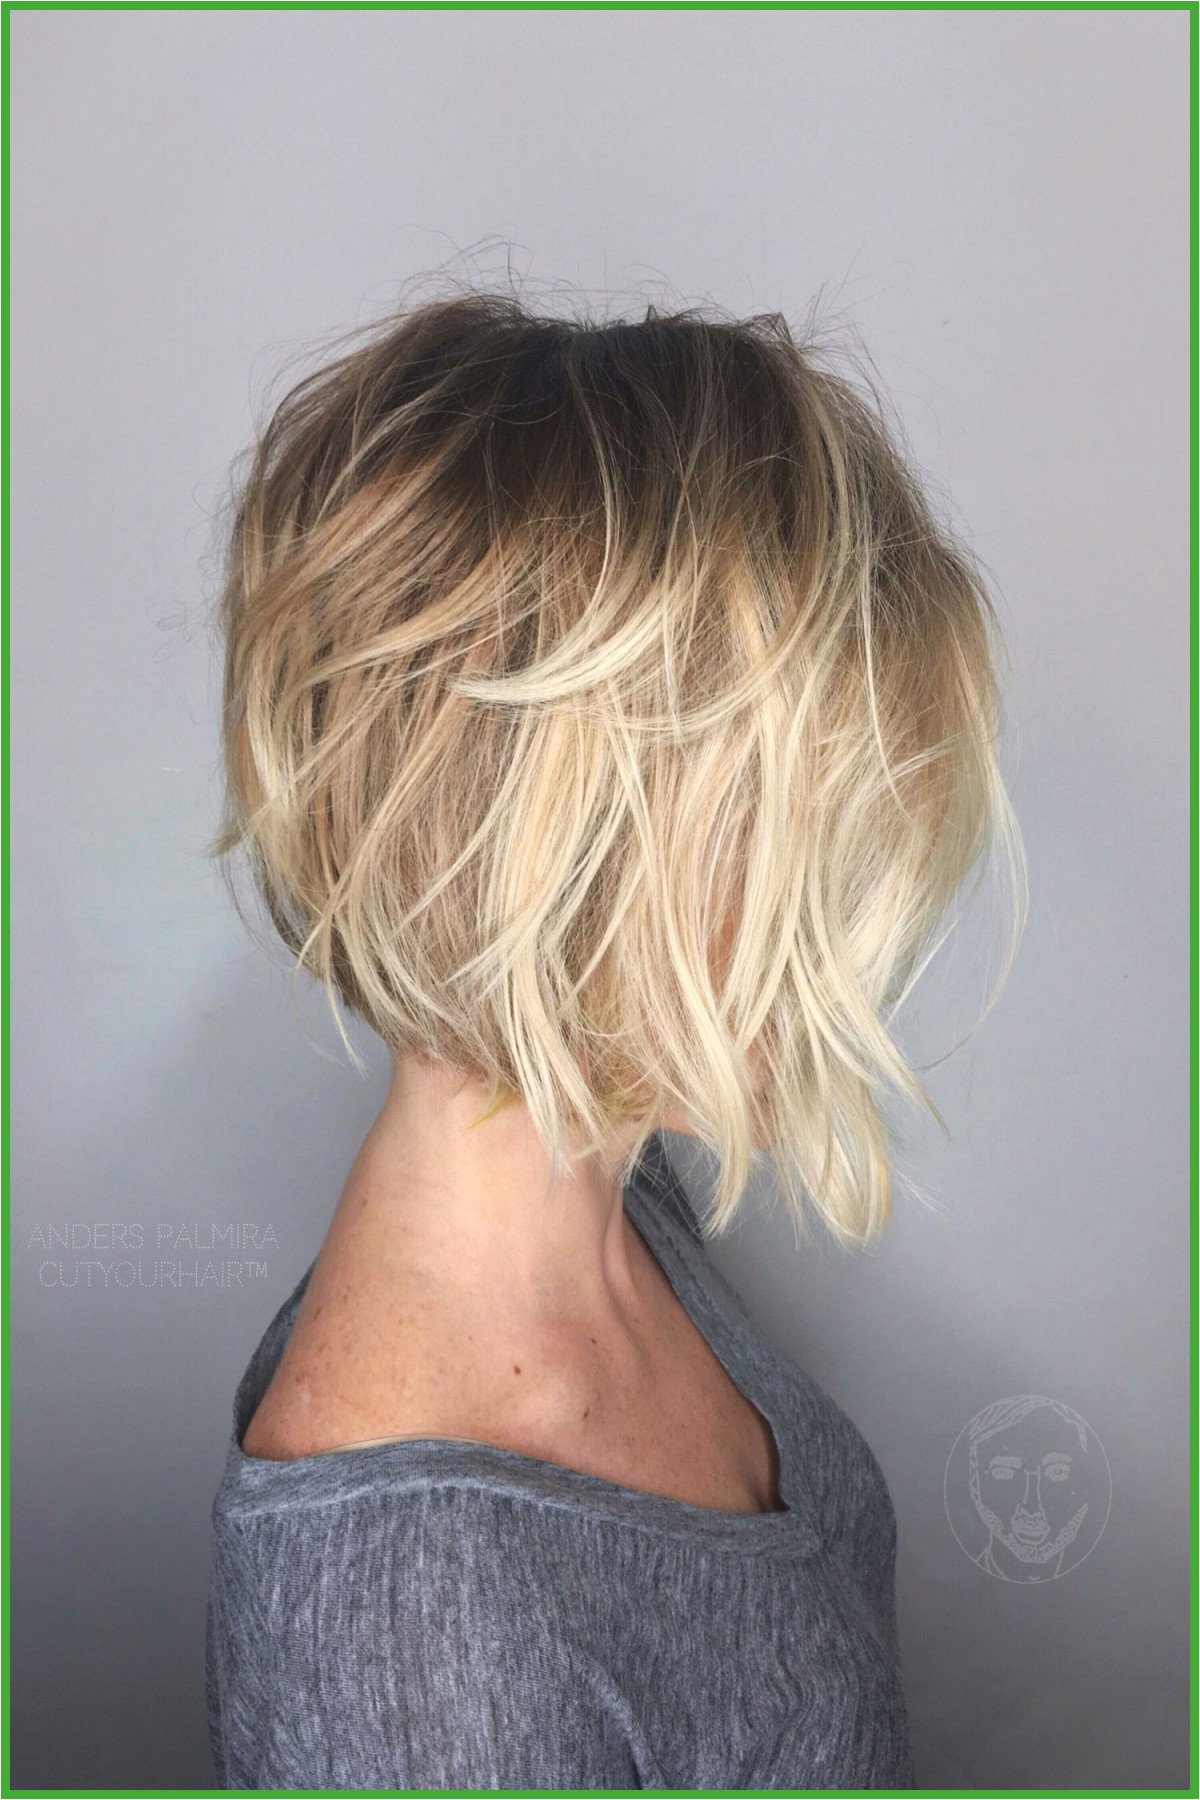 Cute Easy Hairstyles for Short Hair Cool Medium Bob Hairstyle Awesome I Pinimg 1200x 0d 60